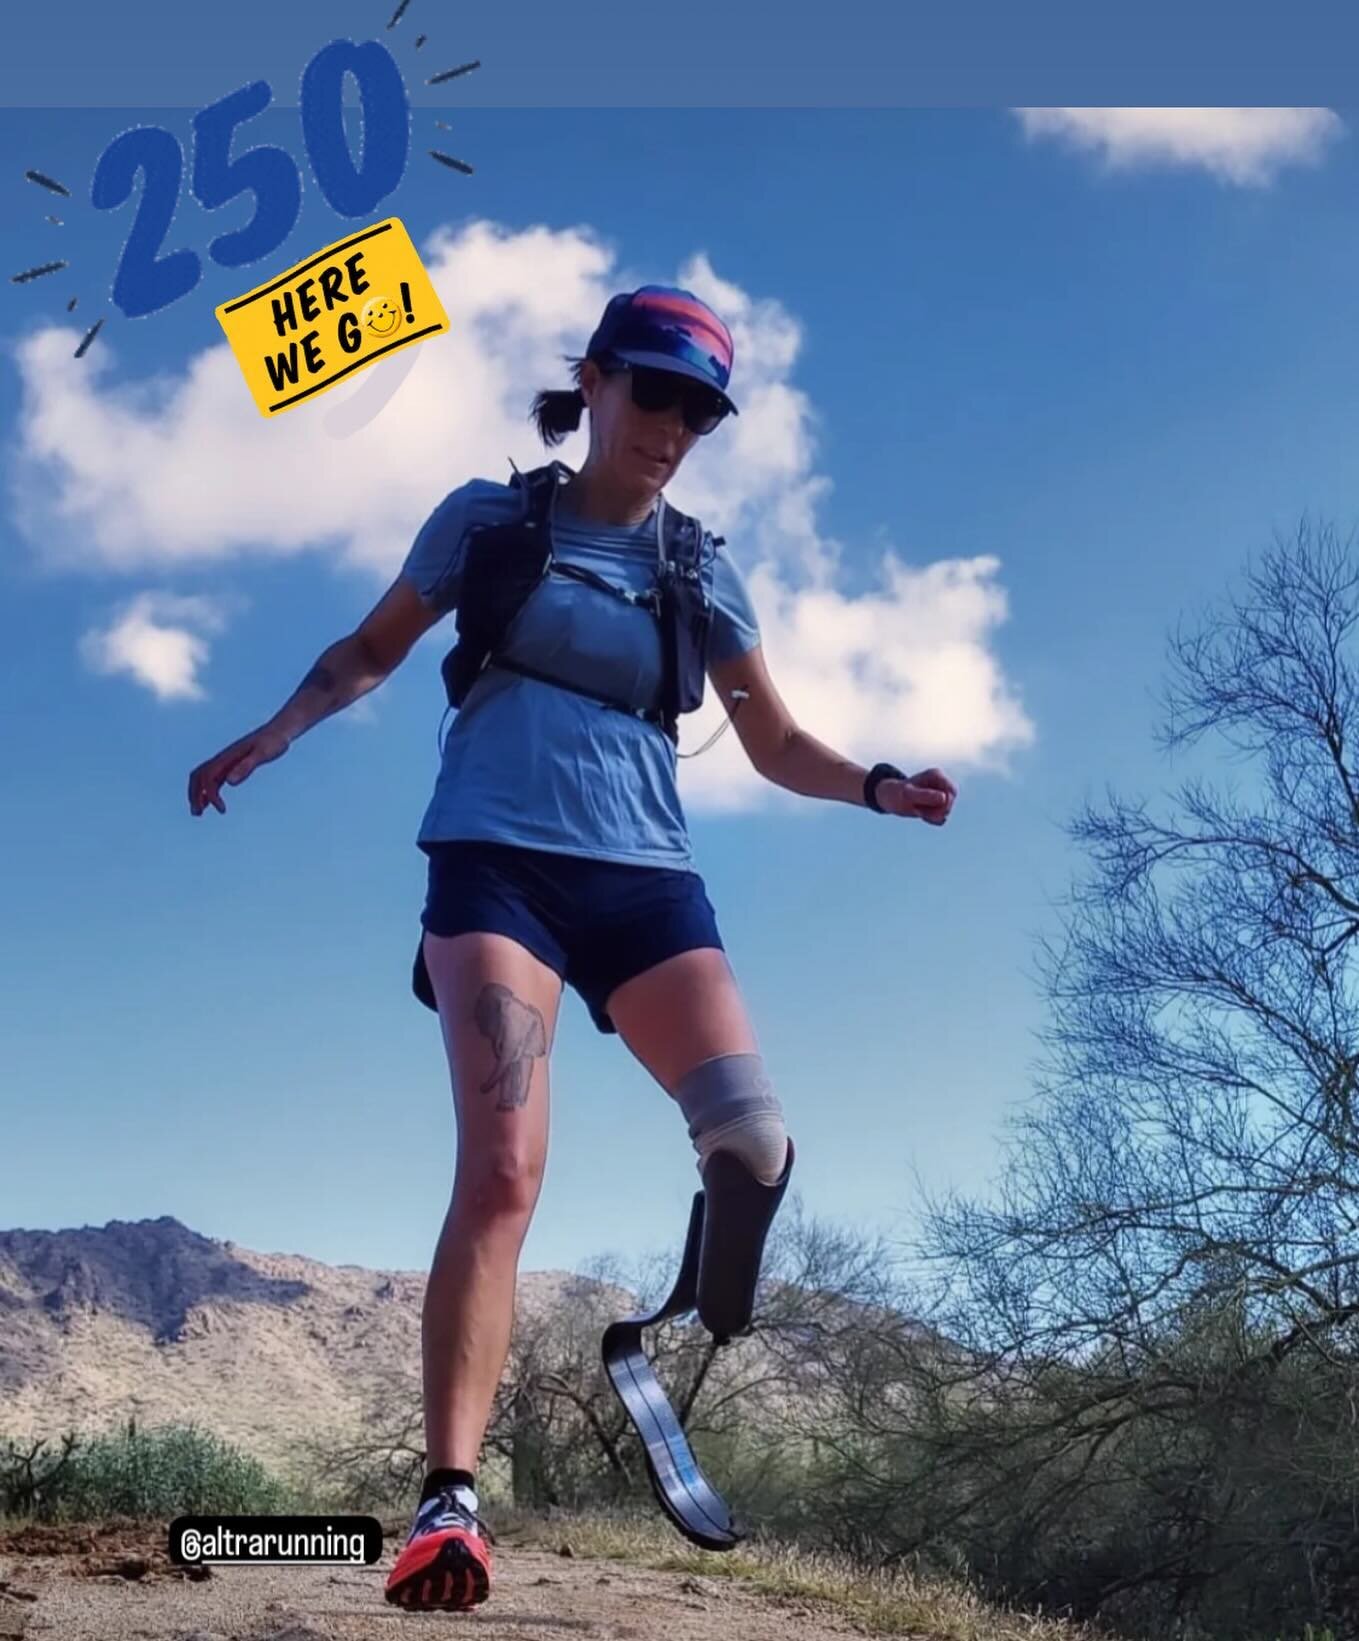 Join us this Saturday (April 6) for a very special day to celebrate and support the incomparable @ncrunnerjacky as she completes her 🎉🎉250th CONSECUTIVE DAILY HALF MARATHON 🎉🎉at San Tan Mountain Regional Park. All paces welcome.

Jacky has run a 